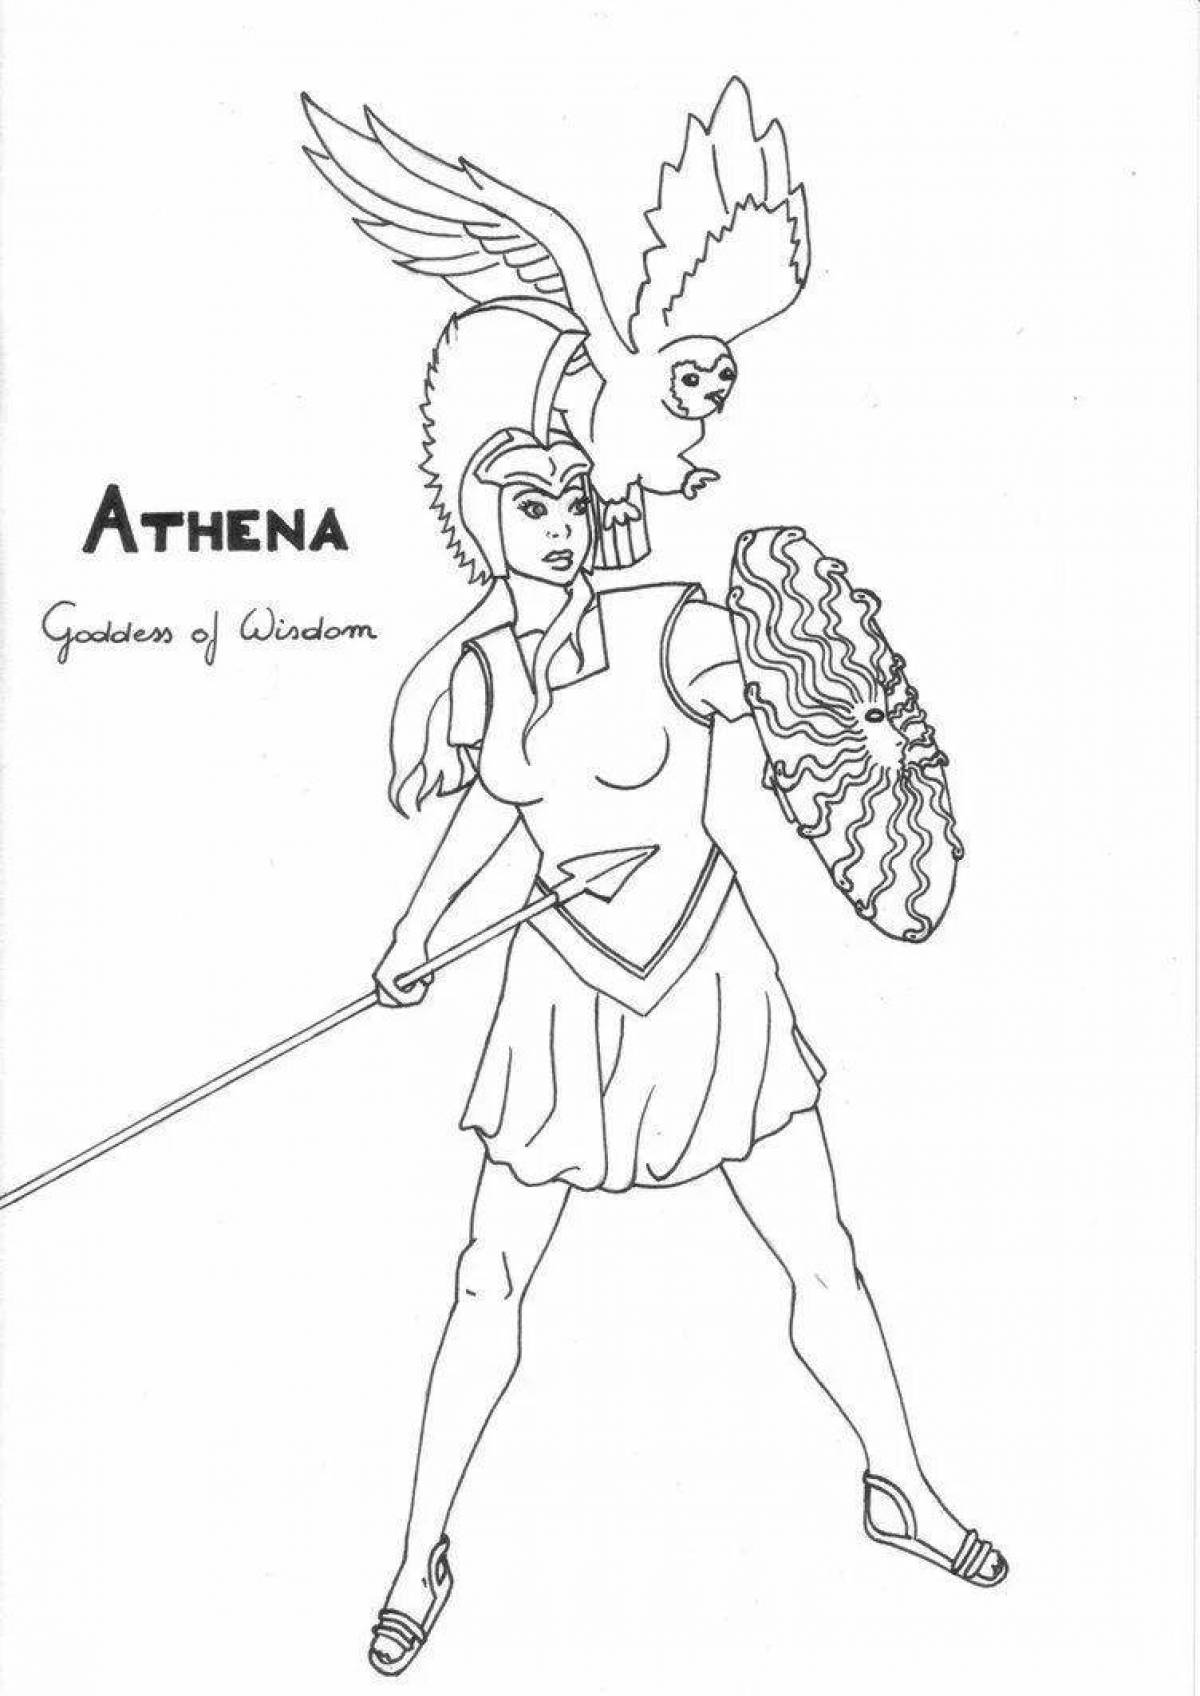 Charming athena coloring page